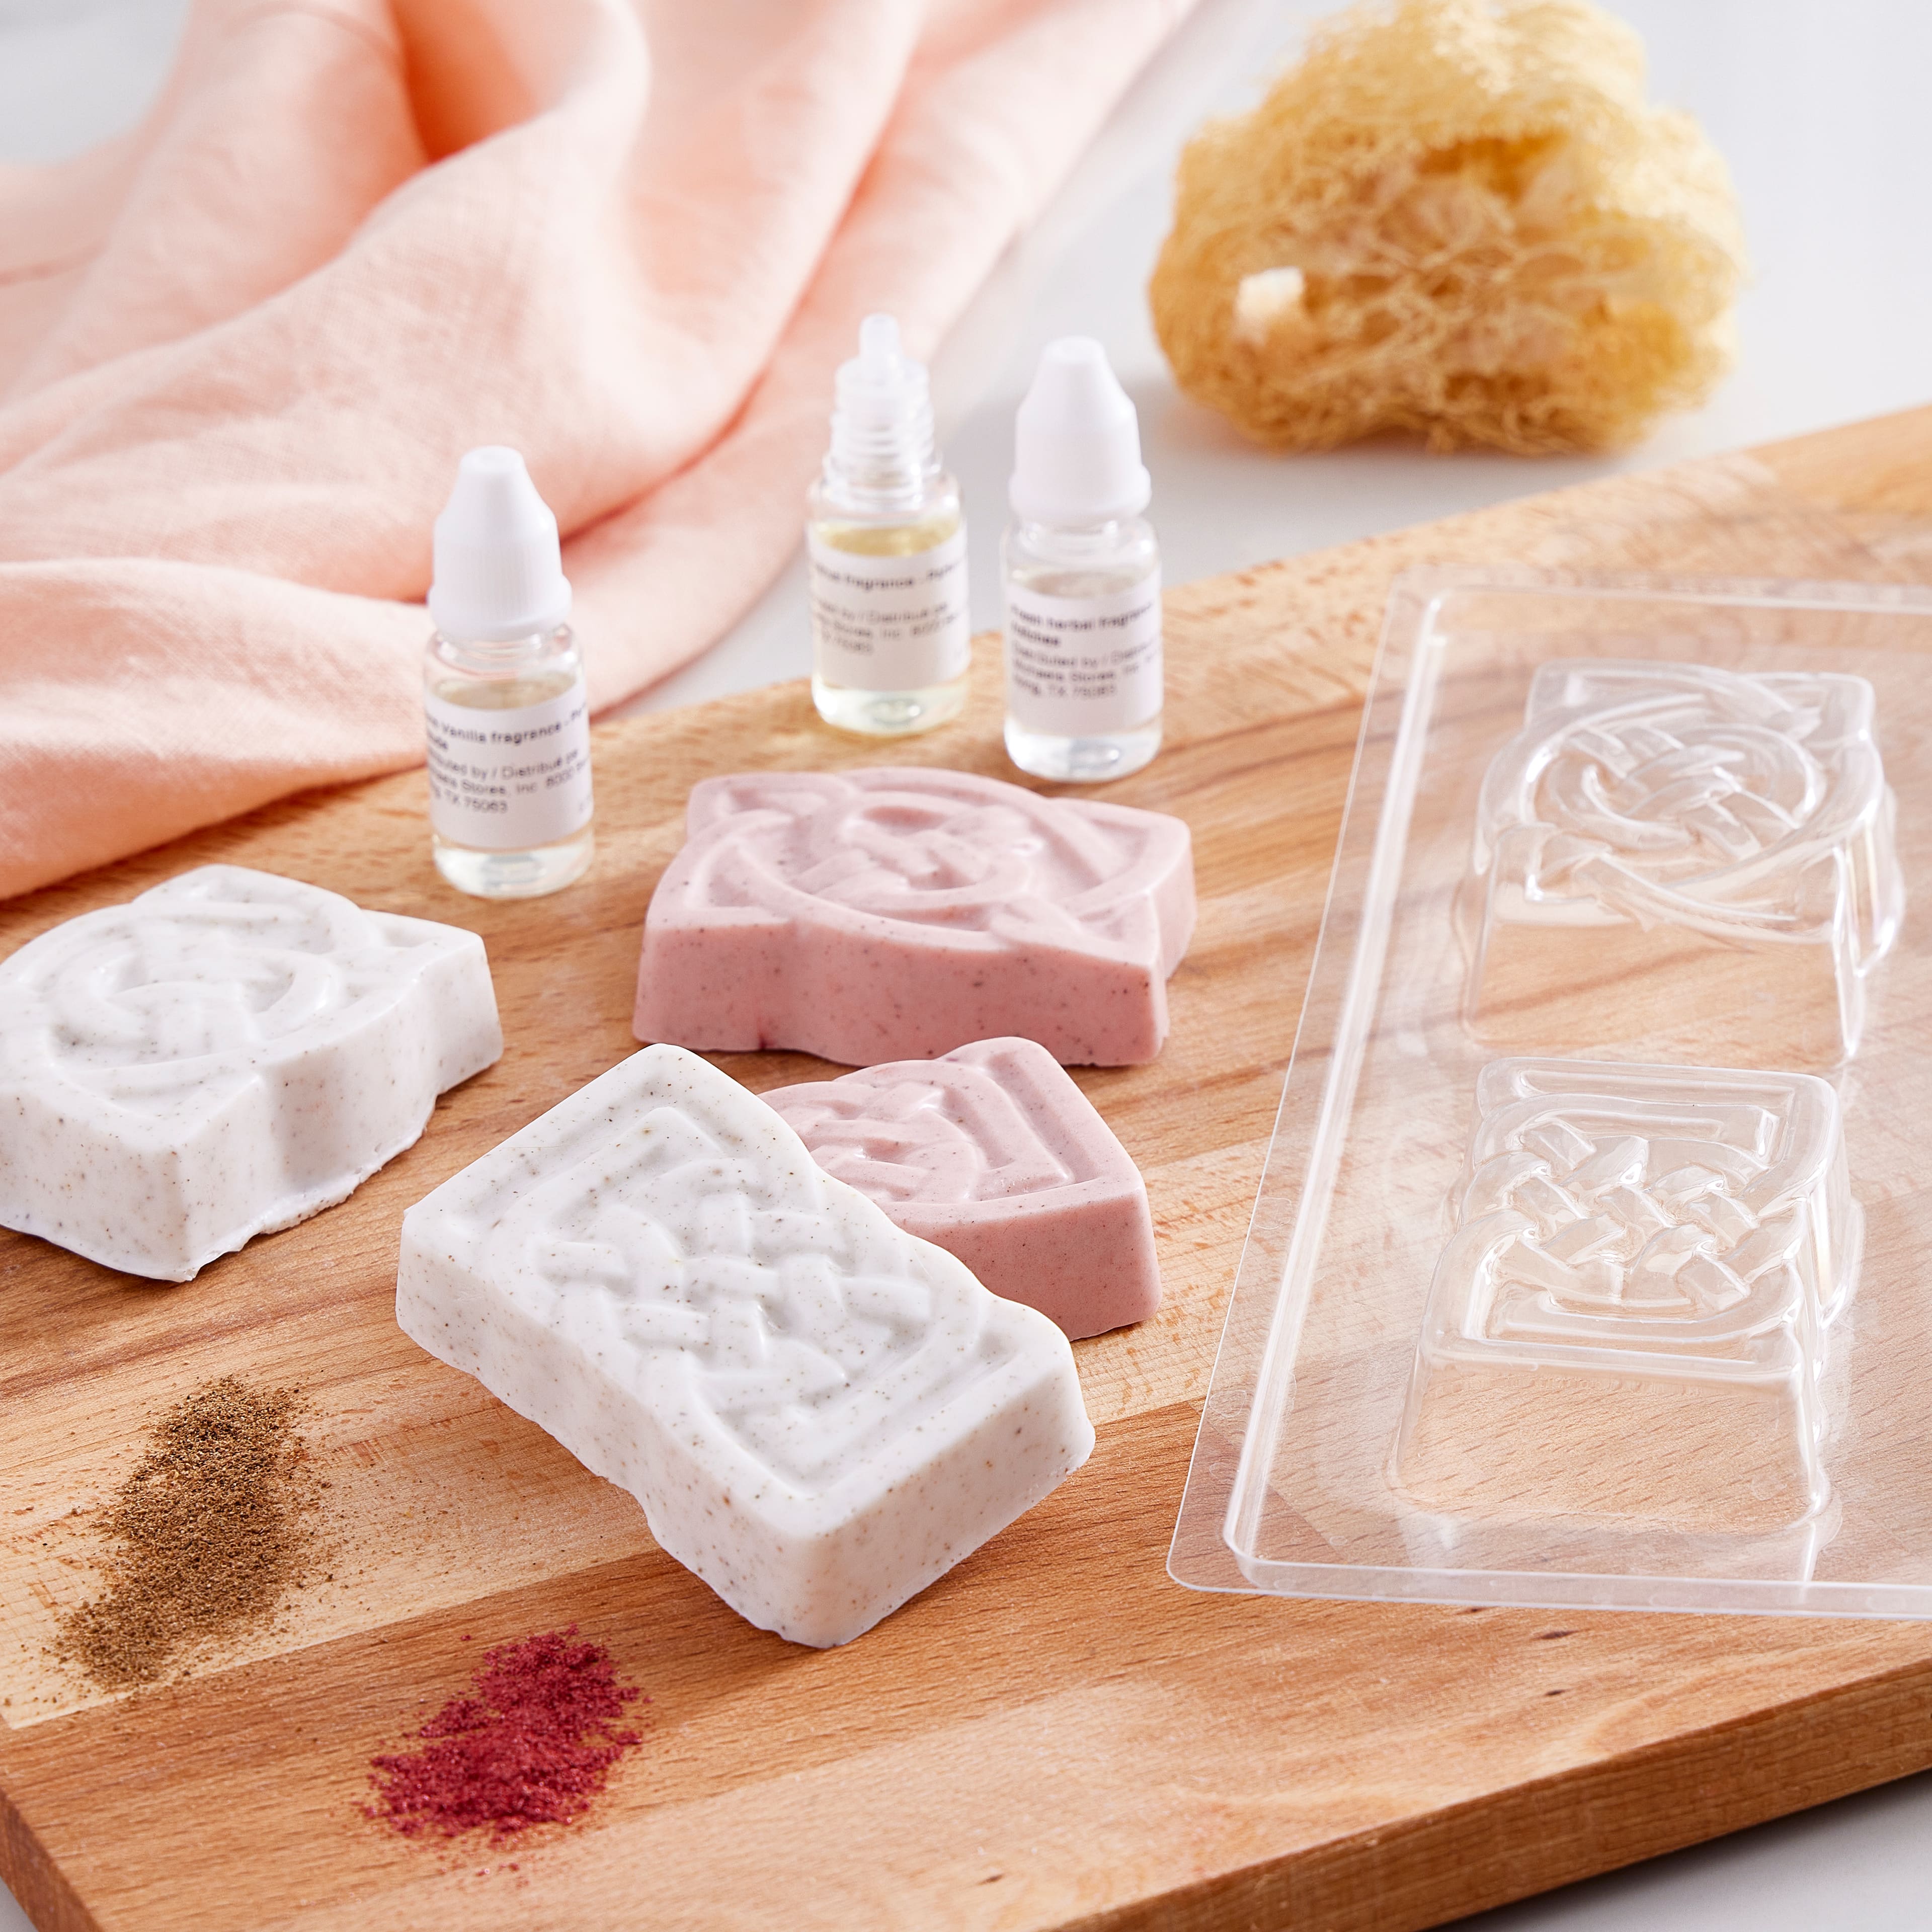  Illumive Soap Making Kit-Includes Soap Making Supplies